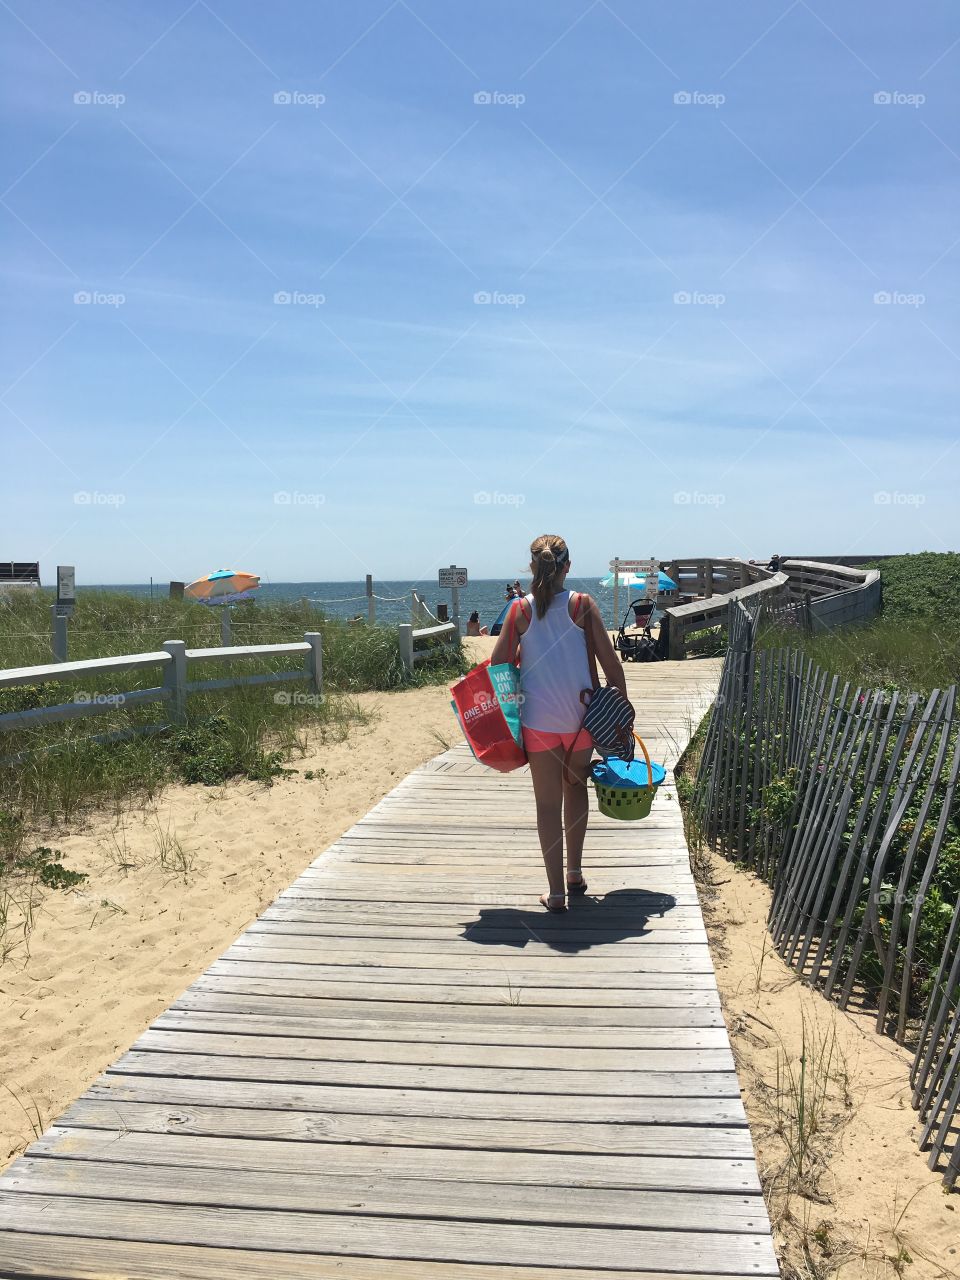 A picture of the boardwalk at cape cod Massachusetts 